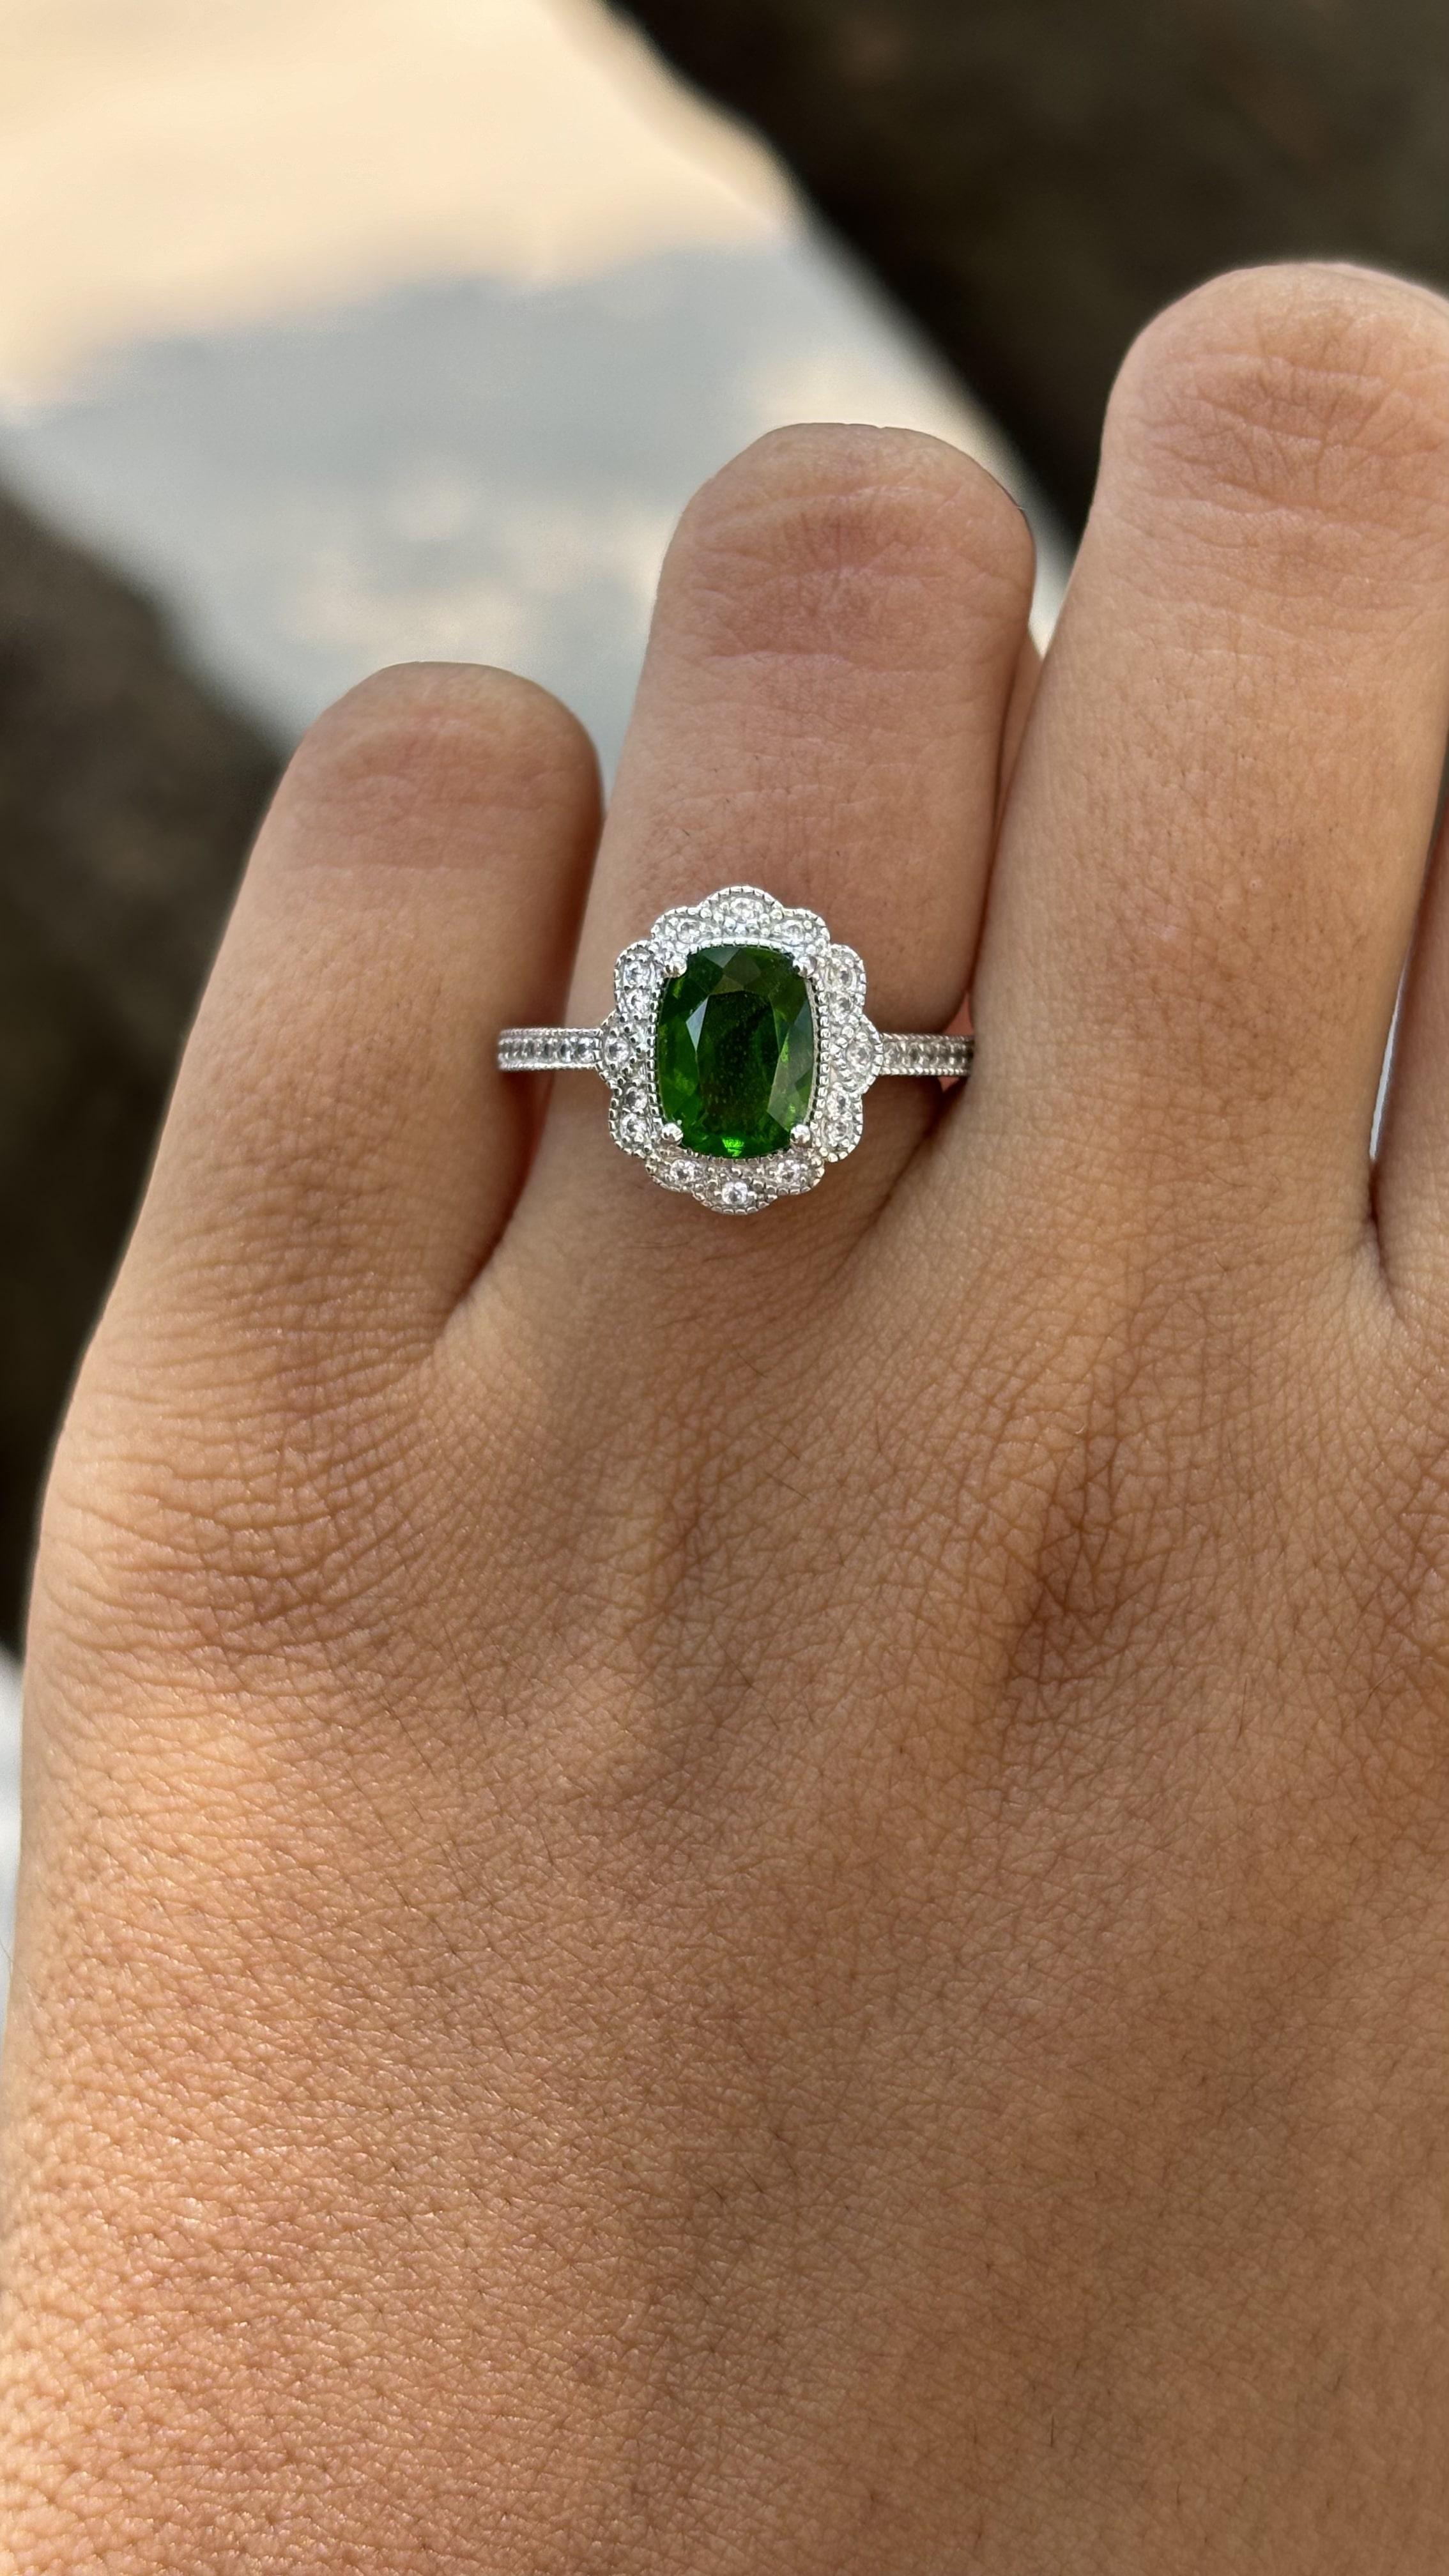 Antique circa 1900s Diopside & CZ Ring in Silver 3